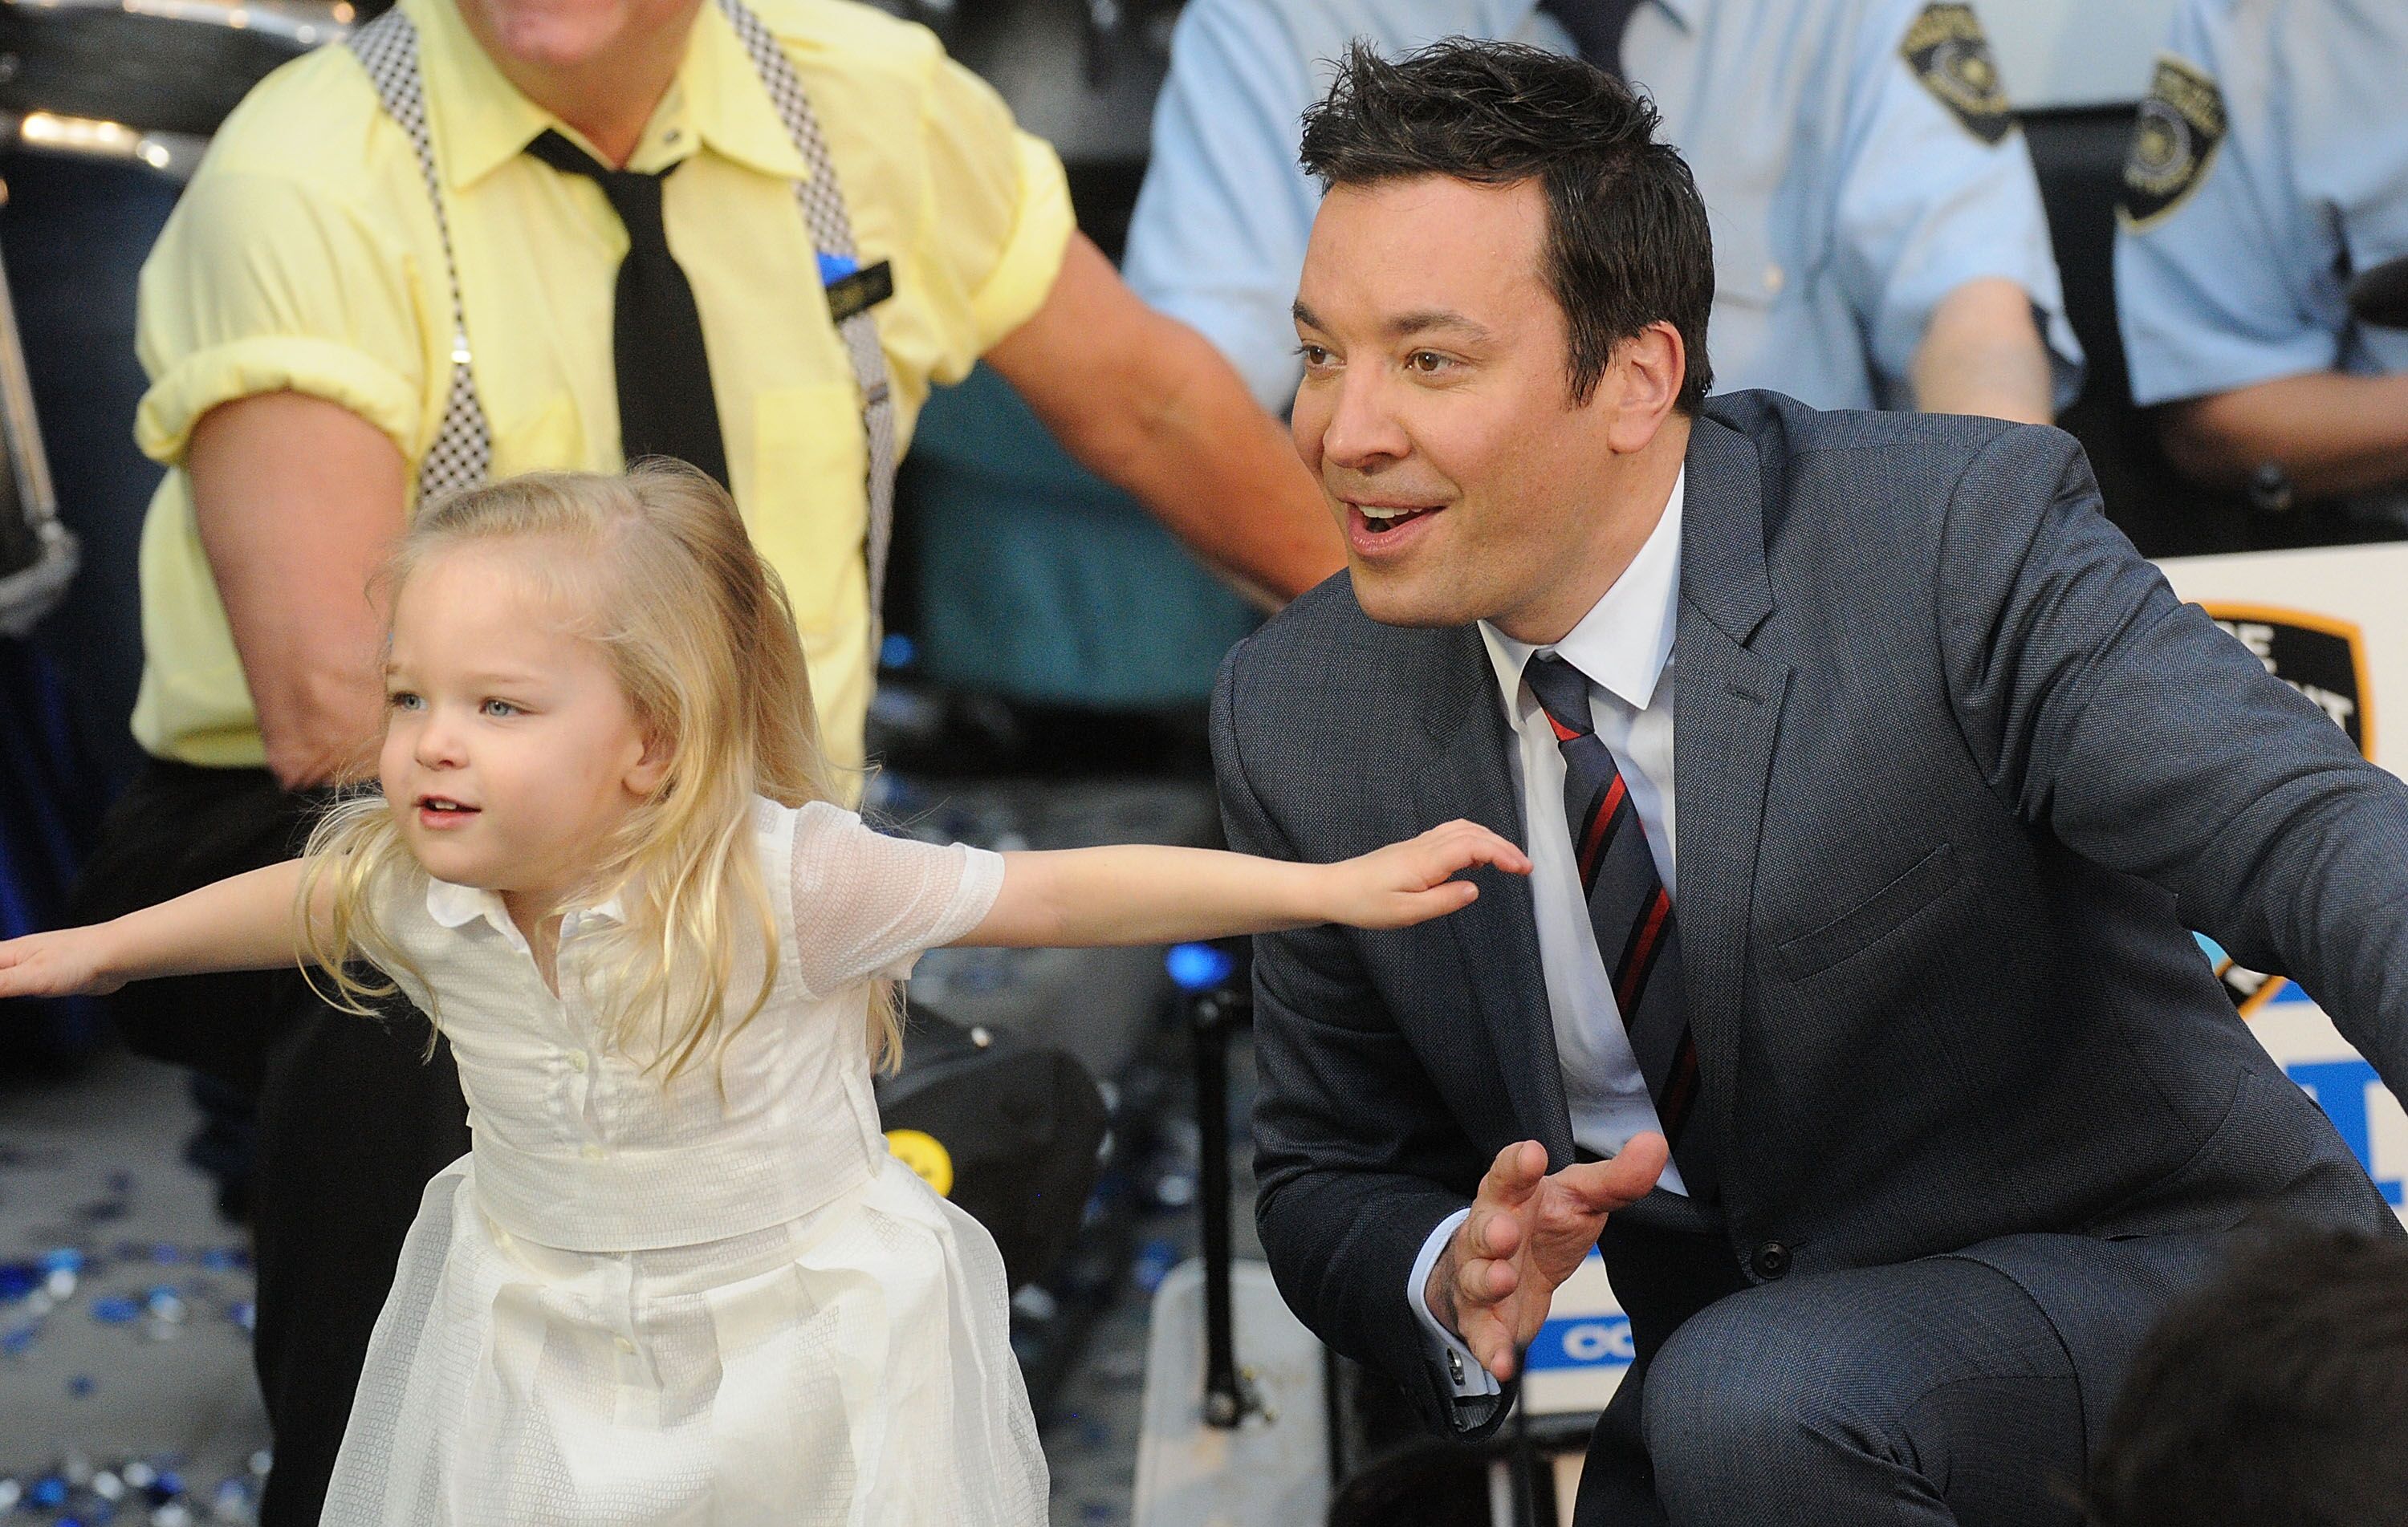 Jimmy Fallon dances with his daughter Winnie Rose during the Grand Opening of Universal Orlando's Newest Attraction "Race Through New York Starring Jimmy Fallon" at Universal Orlando on April 6, 2017. | Source: Getty Images